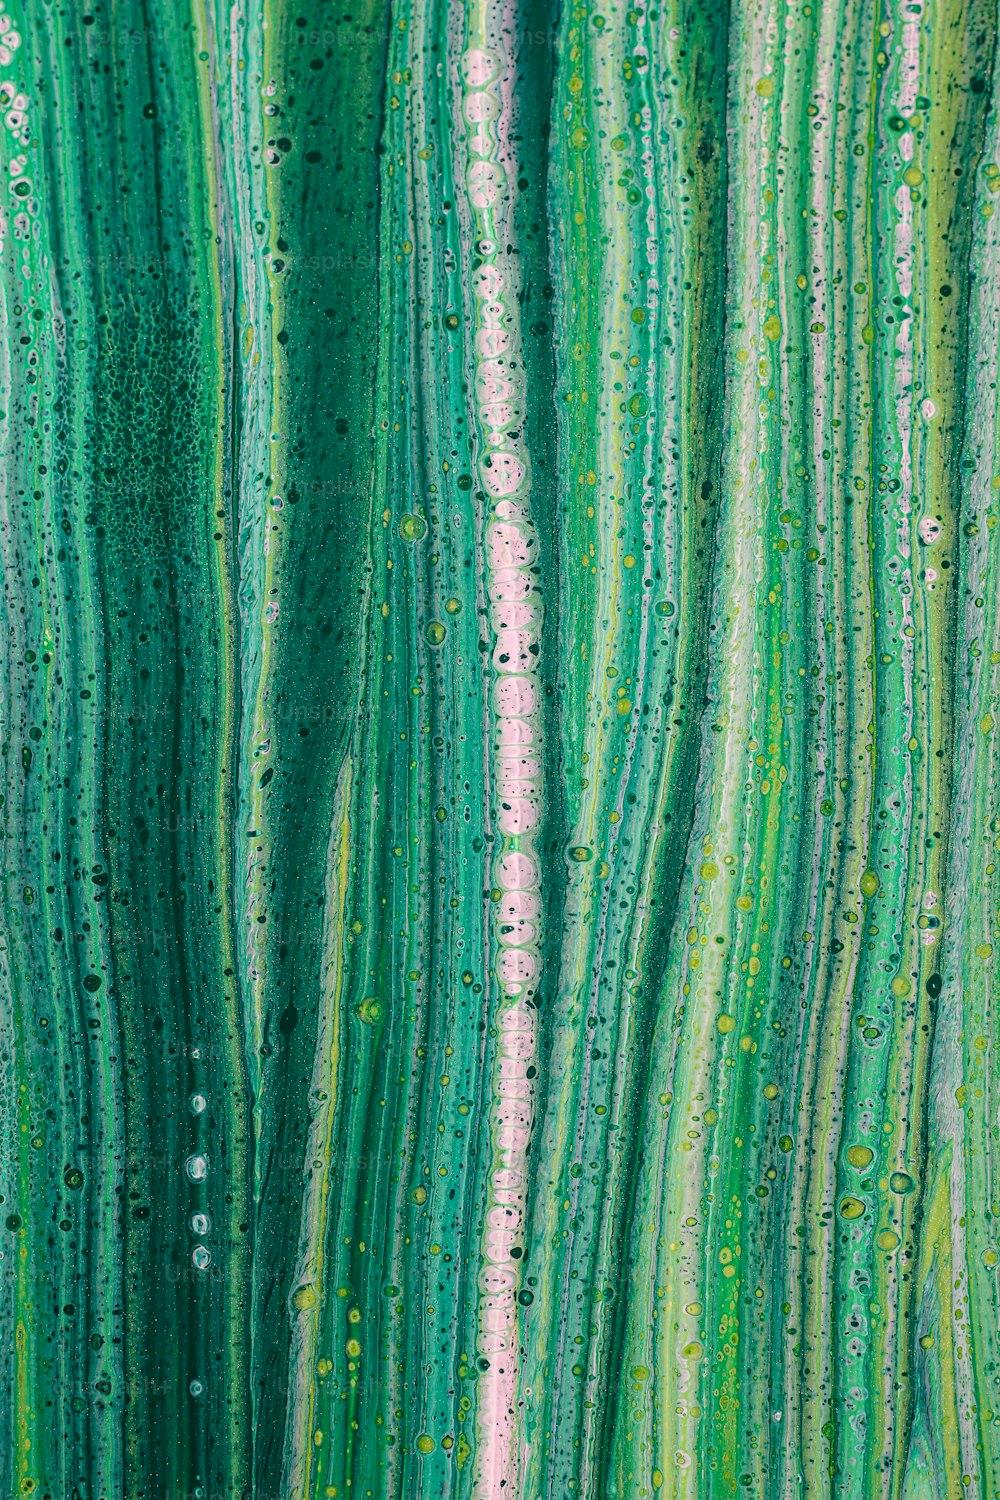 a painting of green and pink lines with drops of water on them